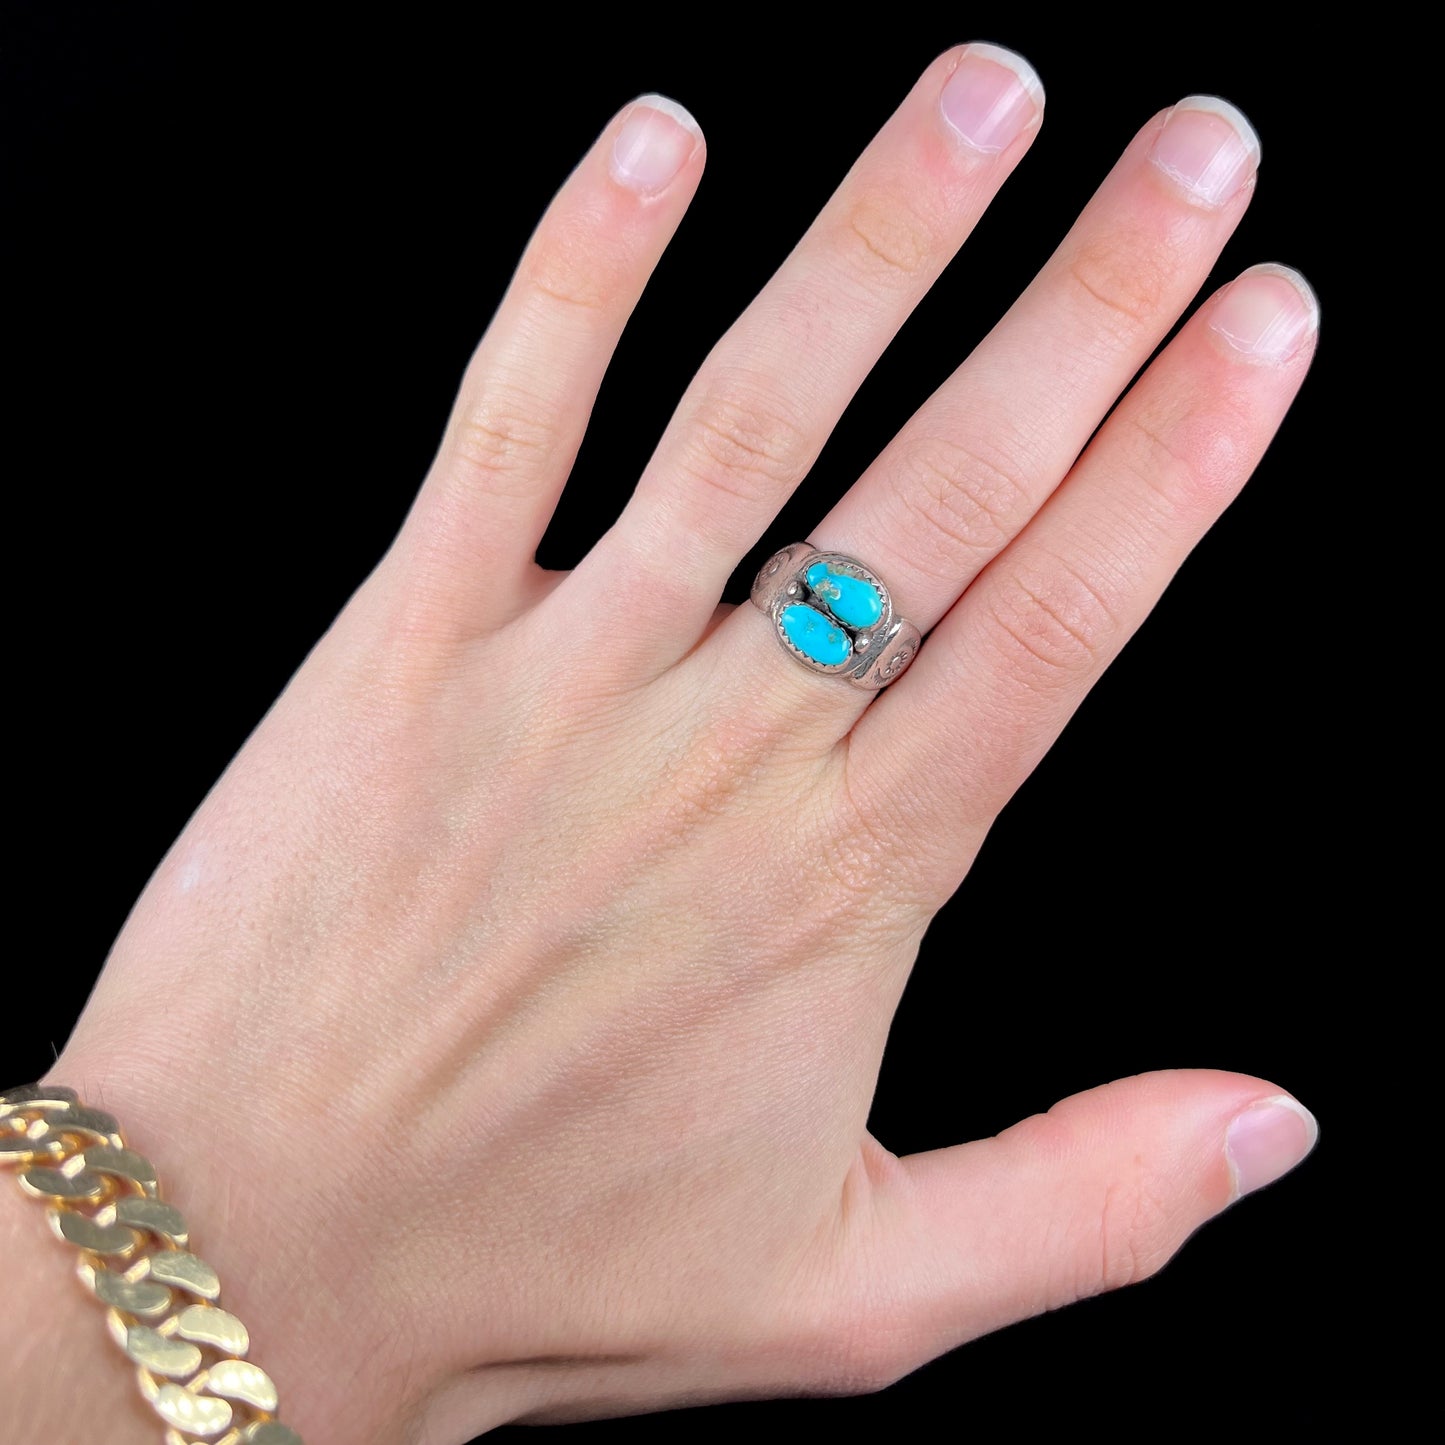 A unisex sterling silver ring bezel set with two Pilot Mountain turquoise stones.  The ring is stamped with sun patterns.